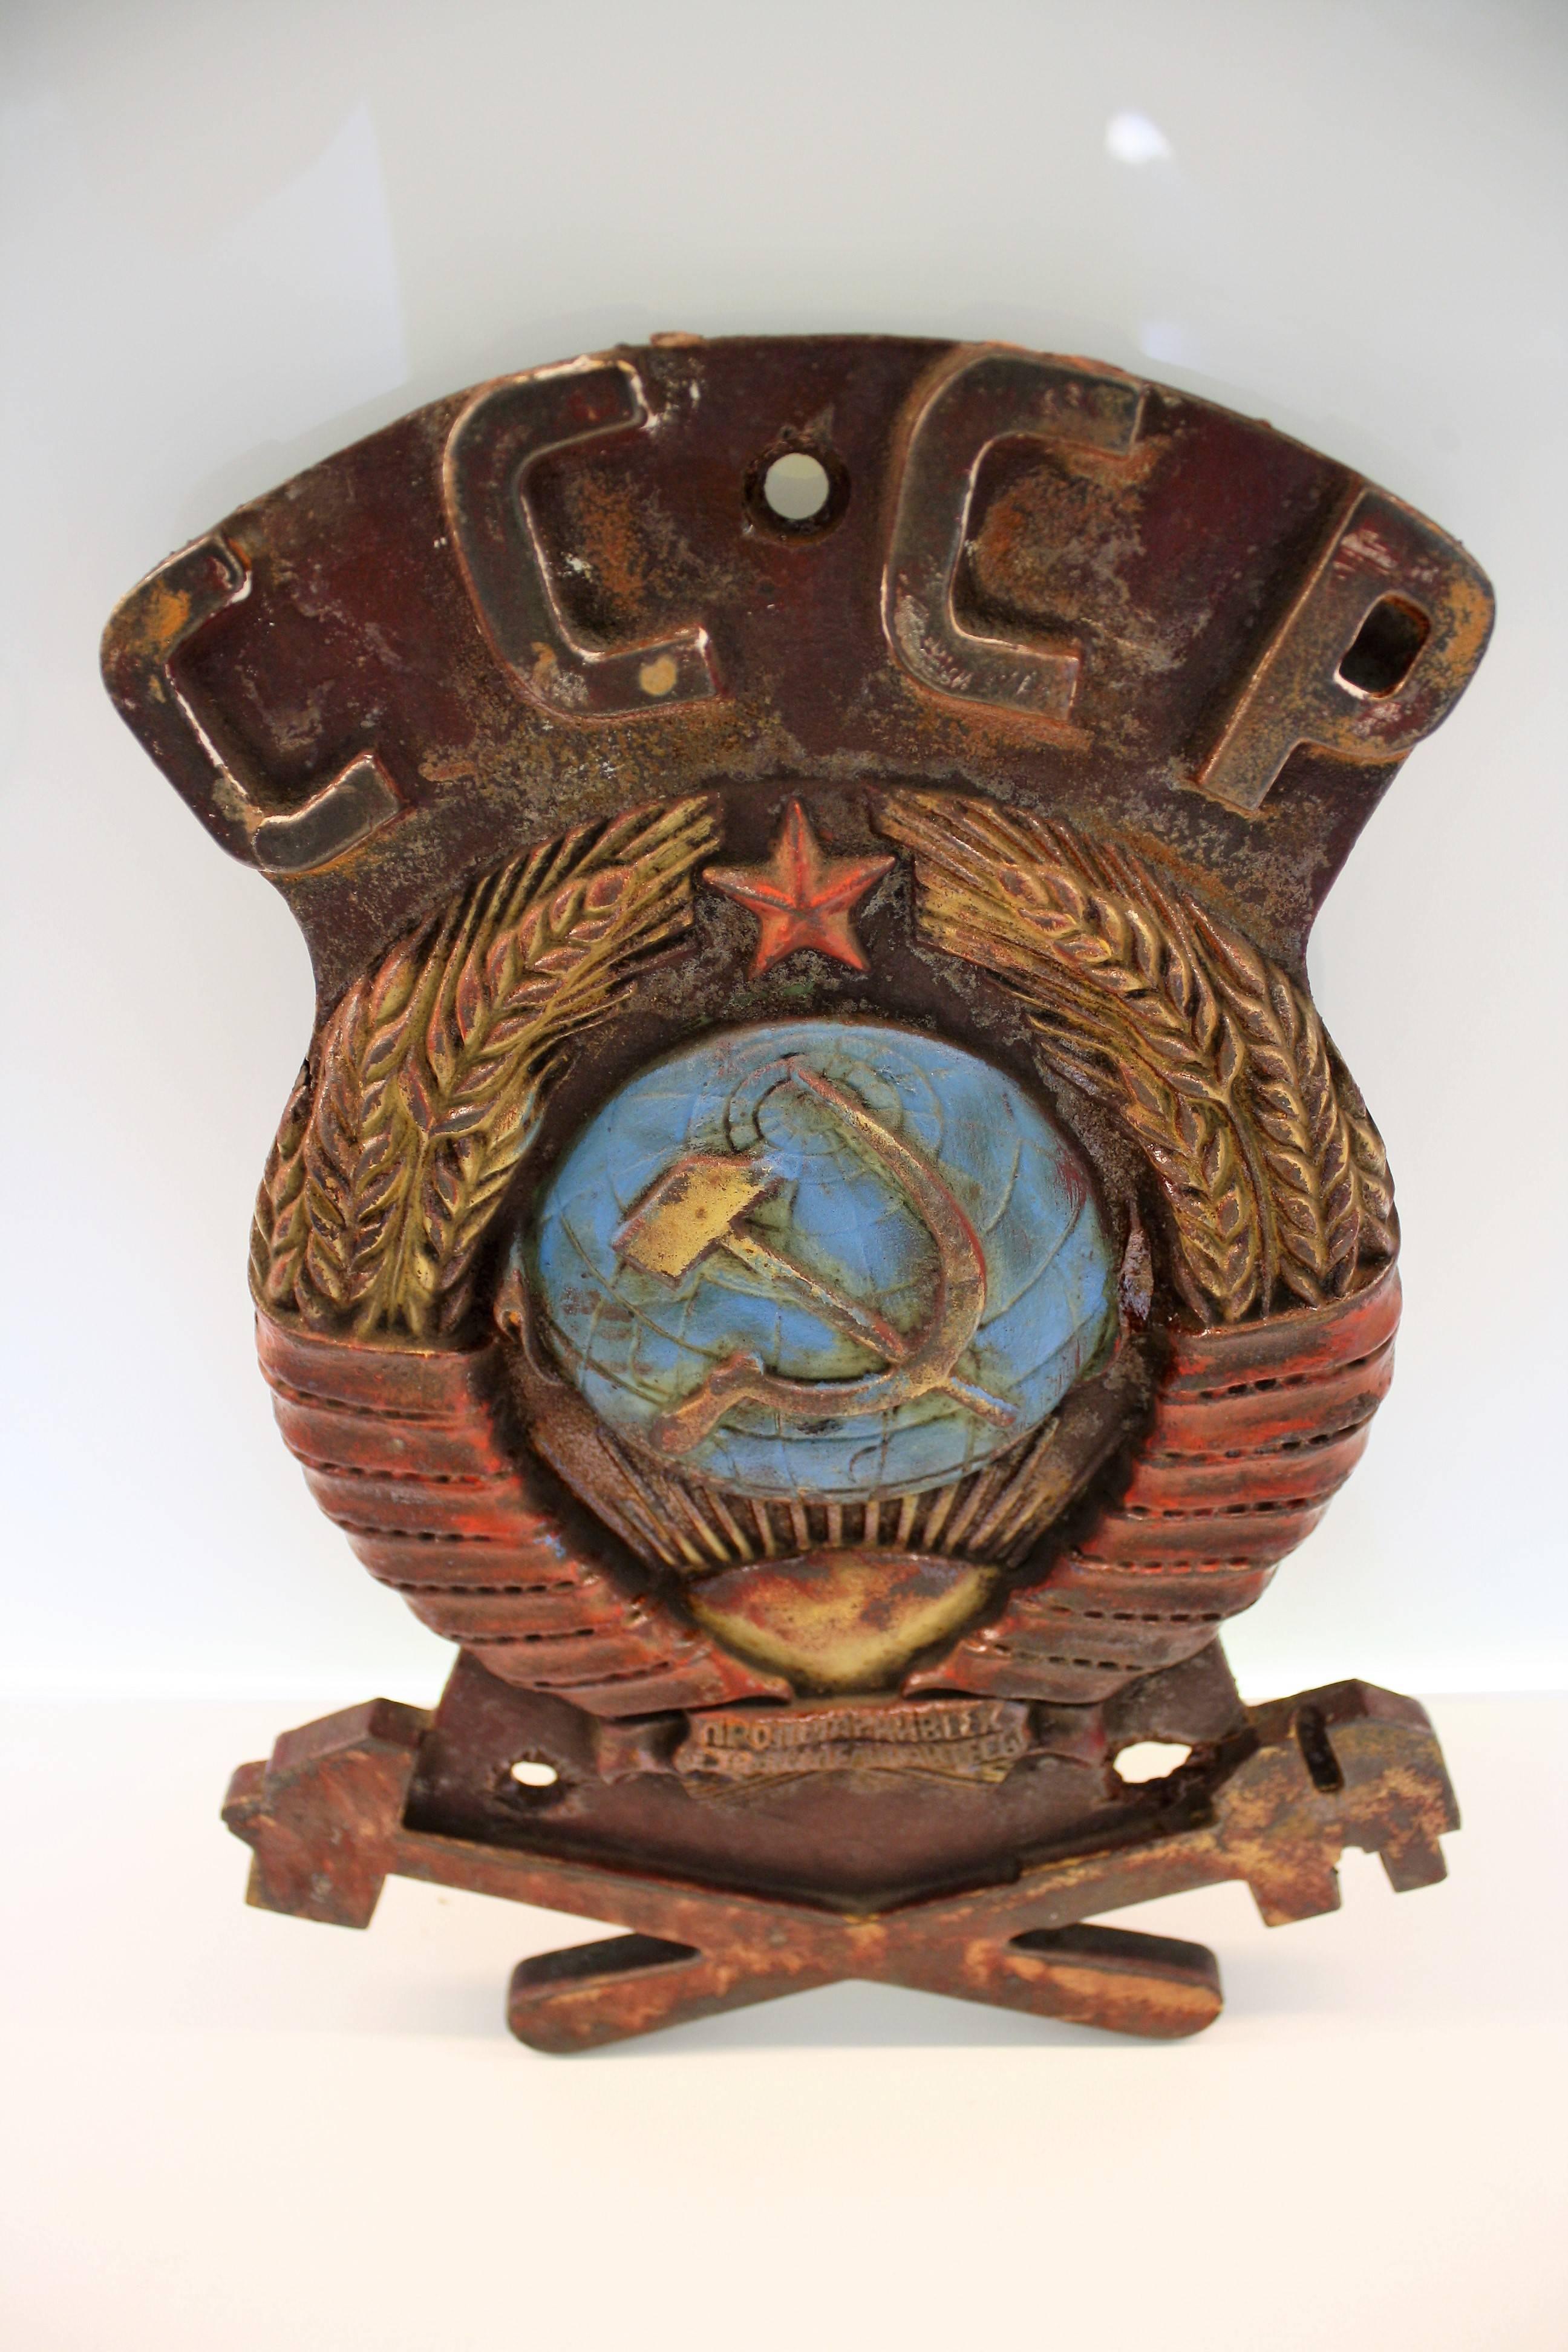 This rather extraordinary cast iron USSR sign was salvaged from the front of a russian locomotive.

An exclusive decorative piece with a statement.

It says CCCP which stands for USSR.

The worn but still visible colours and the detailed logo